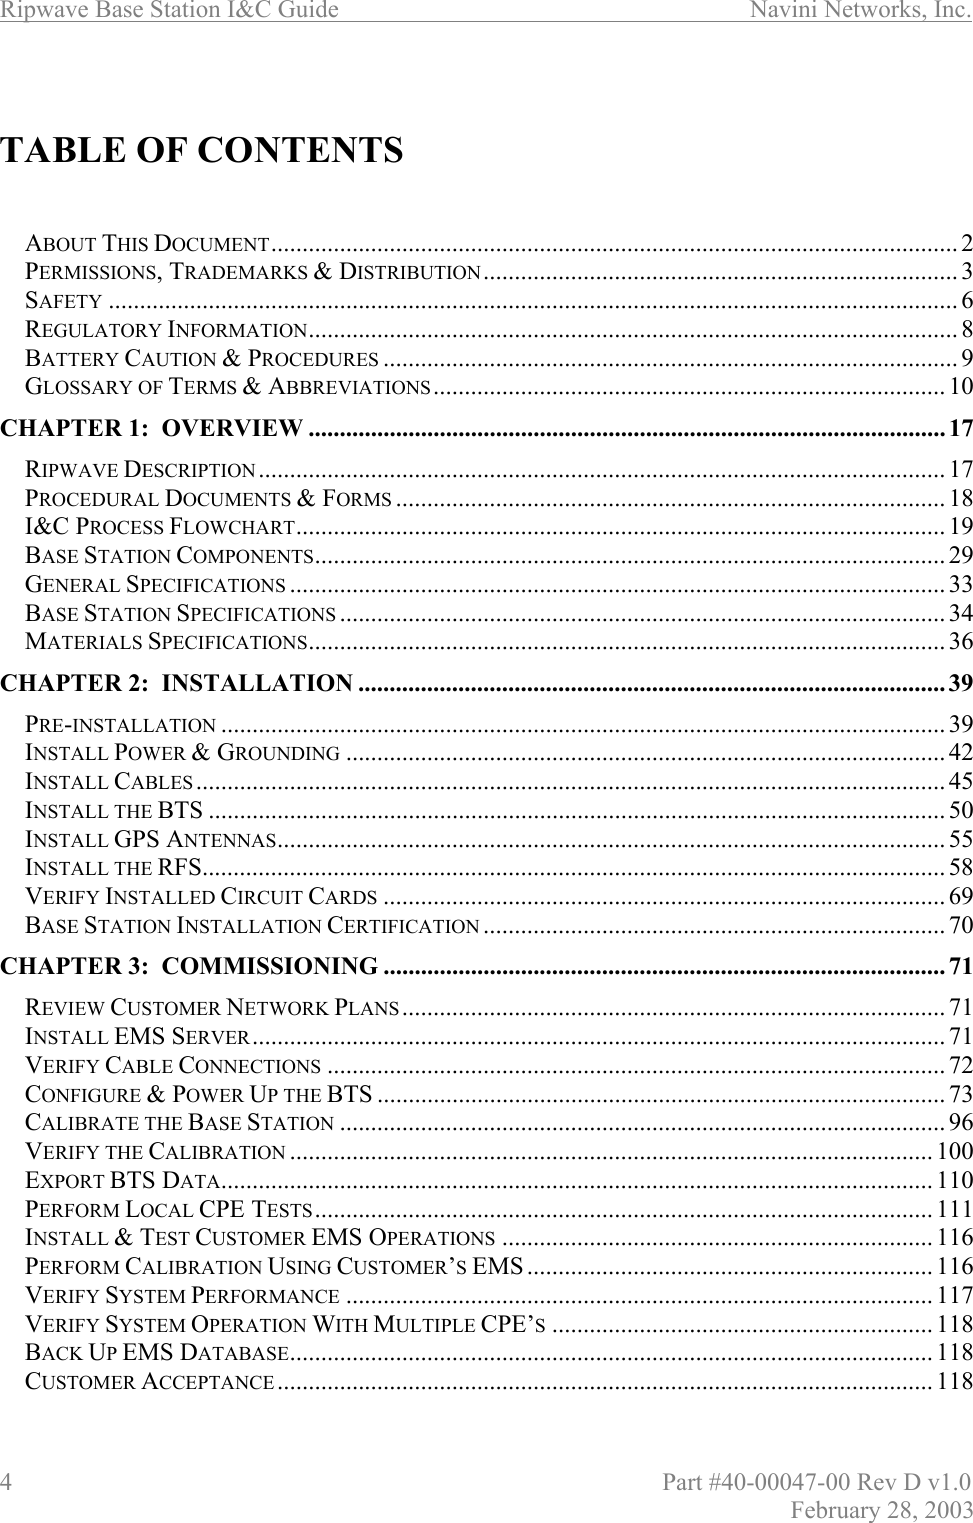 Ripwave Base Station I&amp;C Guide                      Navini Networks, Inc. 4                          Part #40-00047-00 Rev D v1.0 February 28, 2003   TABLE OF CONTENTS   ABOUT THIS DOCUMENT.............................................................................................................. 2 PERMISSIONS, TRADEMARKS &amp; DISTRIBUTION............................................................................ 3 SAFETY ........................................................................................................................................ 6 REGULATORY INFORMATION........................................................................................................ 8 BATTERY CAUTION &amp; PROCEDURES ............................................................................................ 9 GLOSSARY OF TERMS &amp; ABBREVIATIONS.................................................................................. 10 CHAPTER 1:  OVERVIEW ...................................................................................................... 17 RIPWAVE DESCRIPTION .............................................................................................................. 17 PROCEDURAL DOCUMENTS &amp; FORMS ........................................................................................ 18 I&amp;C PROCESS FLOWCHART........................................................................................................ 19 BASE STATION COMPONENTS..................................................................................................... 29 GENERAL SPECIFICATIONS ......................................................................................................... 33 BASE STATION SPECIFICATIONS ................................................................................................. 34 MATERIALS SPECIFICATIONS...................................................................................................... 36 CHAPTER 2:  INSTALLATION .............................................................................................. 39 PRE-INSTALLATION .................................................................................................................... 39 INSTALL POWER &amp; GROUNDING ................................................................................................ 42 INSTALL CABLES ........................................................................................................................ 45 INSTALL THE BTS ...................................................................................................................... 50 INSTALL GPS ANTENNAS........................................................................................................... 55 INSTALL THE RFS....................................................................................................................... 58 VERIFY INSTALLED CIRCUIT CARDS .......................................................................................... 69 BASE STATION INSTALLATION CERTIFICATION .......................................................................... 70 CHAPTER 3:  COMMISSIONING .......................................................................................... 71 REVIEW CUSTOMER NETWORK PLANS ....................................................................................... 71 INSTALL EMS SERVER............................................................................................................... 71 VERIFY CABLE CONNECTIONS ................................................................................................... 72 CONFIGURE &amp; POWER UP THE BTS ...........................................................................................73 CALIBRATE THE BASE STATION ................................................................................................. 96 VERIFY THE CALIBRATION ....................................................................................................... 100 EXPORT BTS DATA.................................................................................................................. 110 PERFORM LOCAL CPE TESTS................................................................................................... 111 INSTALL &amp; TEST CUSTOMER EMS OPERATIONS ..................................................................... 116 PERFORM CALIBRATION USING CUSTOMER’S EMS ................................................................. 116 VERIFY SYSTEM PERFORMANCE .............................................................................................. 117 VERIFY SYSTEM OPERATION WITH MULTIPLE CPE’S............................................................. 118 BACK UP EMS DATABASE....................................................................................................... 118 CUSTOMER ACCEPTANCE ......................................................................................................... 118 